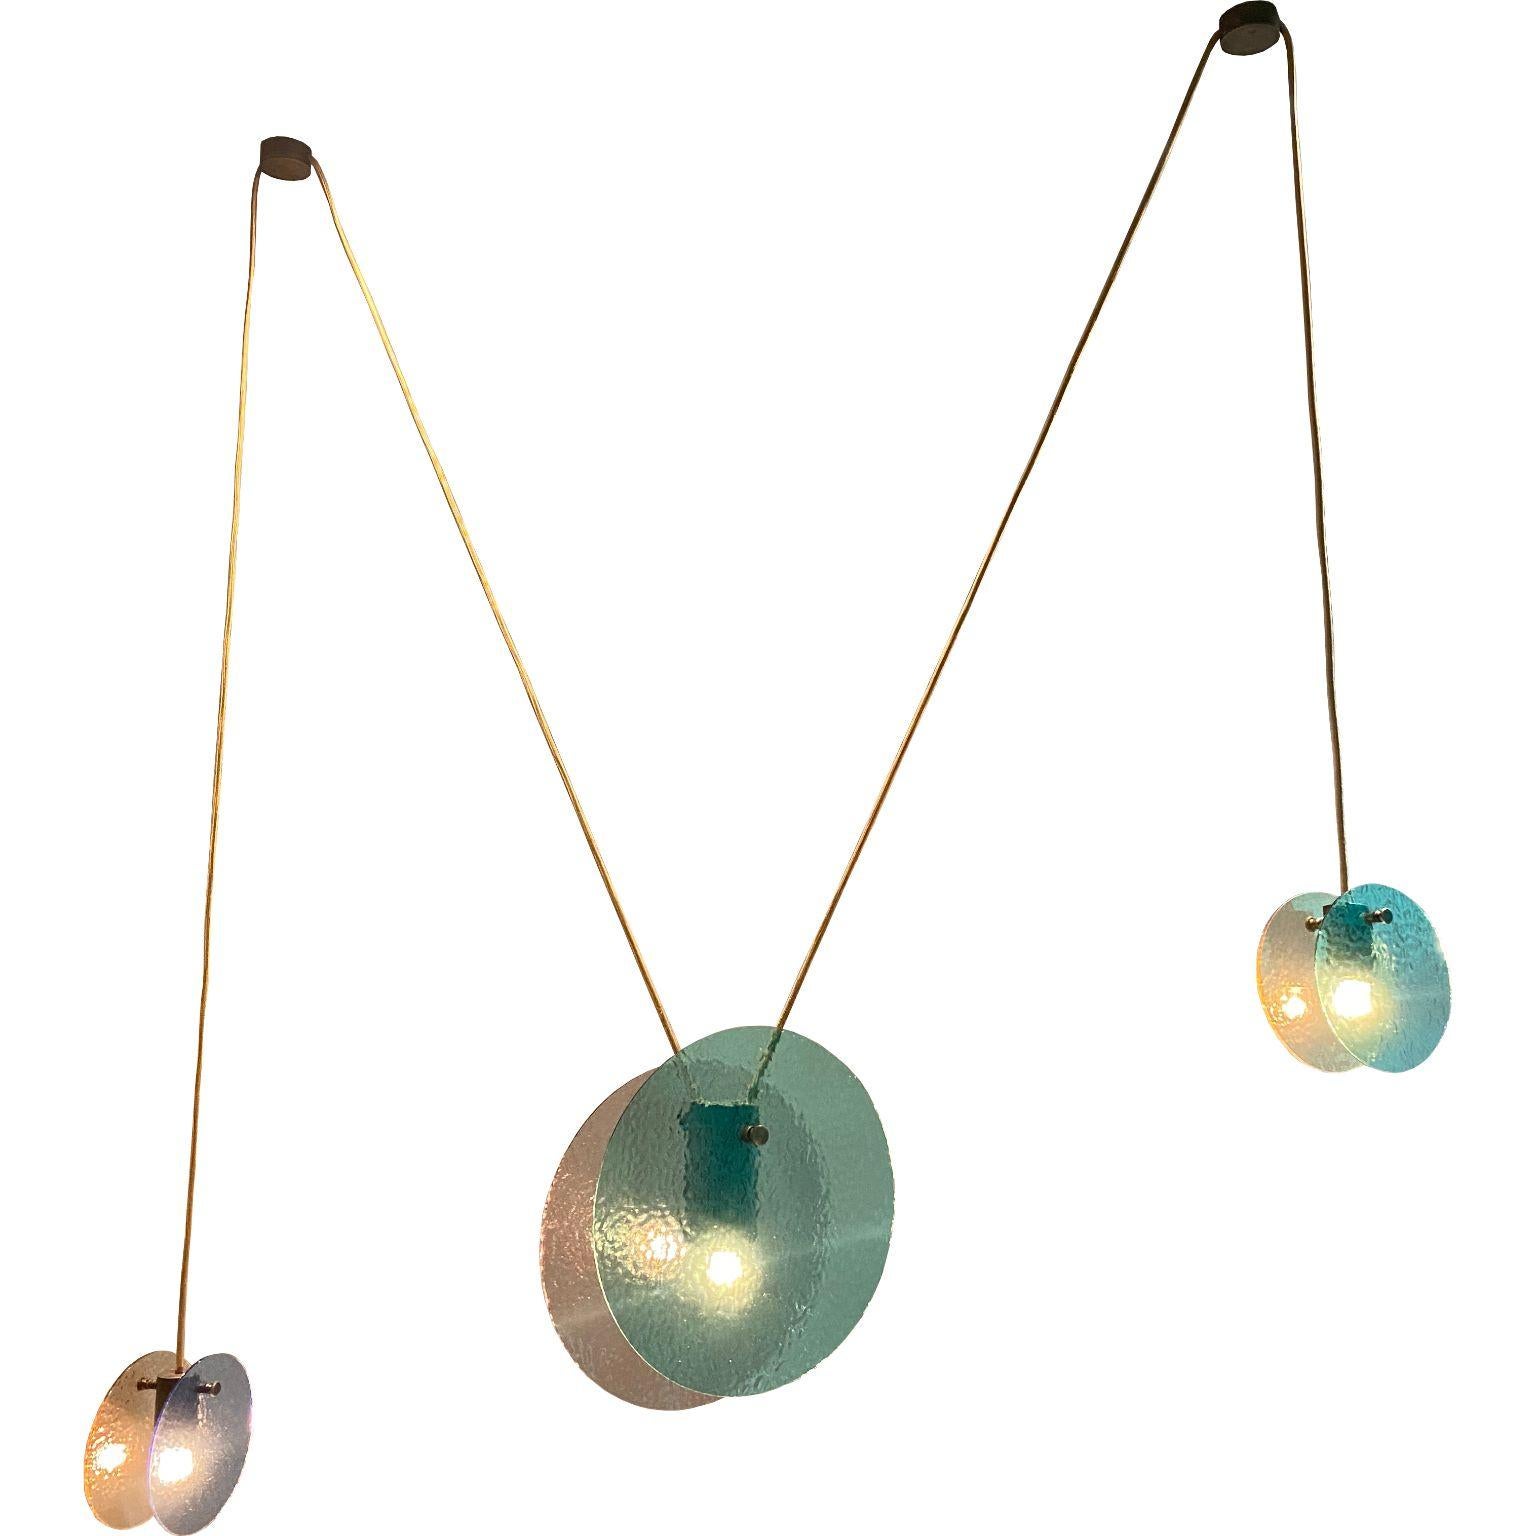 Kalupso small ceiling light by Moure Studio
Dimensions: D150 x H80 cm
Materials: glass and patinated brass
Also available in different dimensions. 

Our Kalupso chandelier is inspired by the Greek nymph of the sea. This name also evokes the